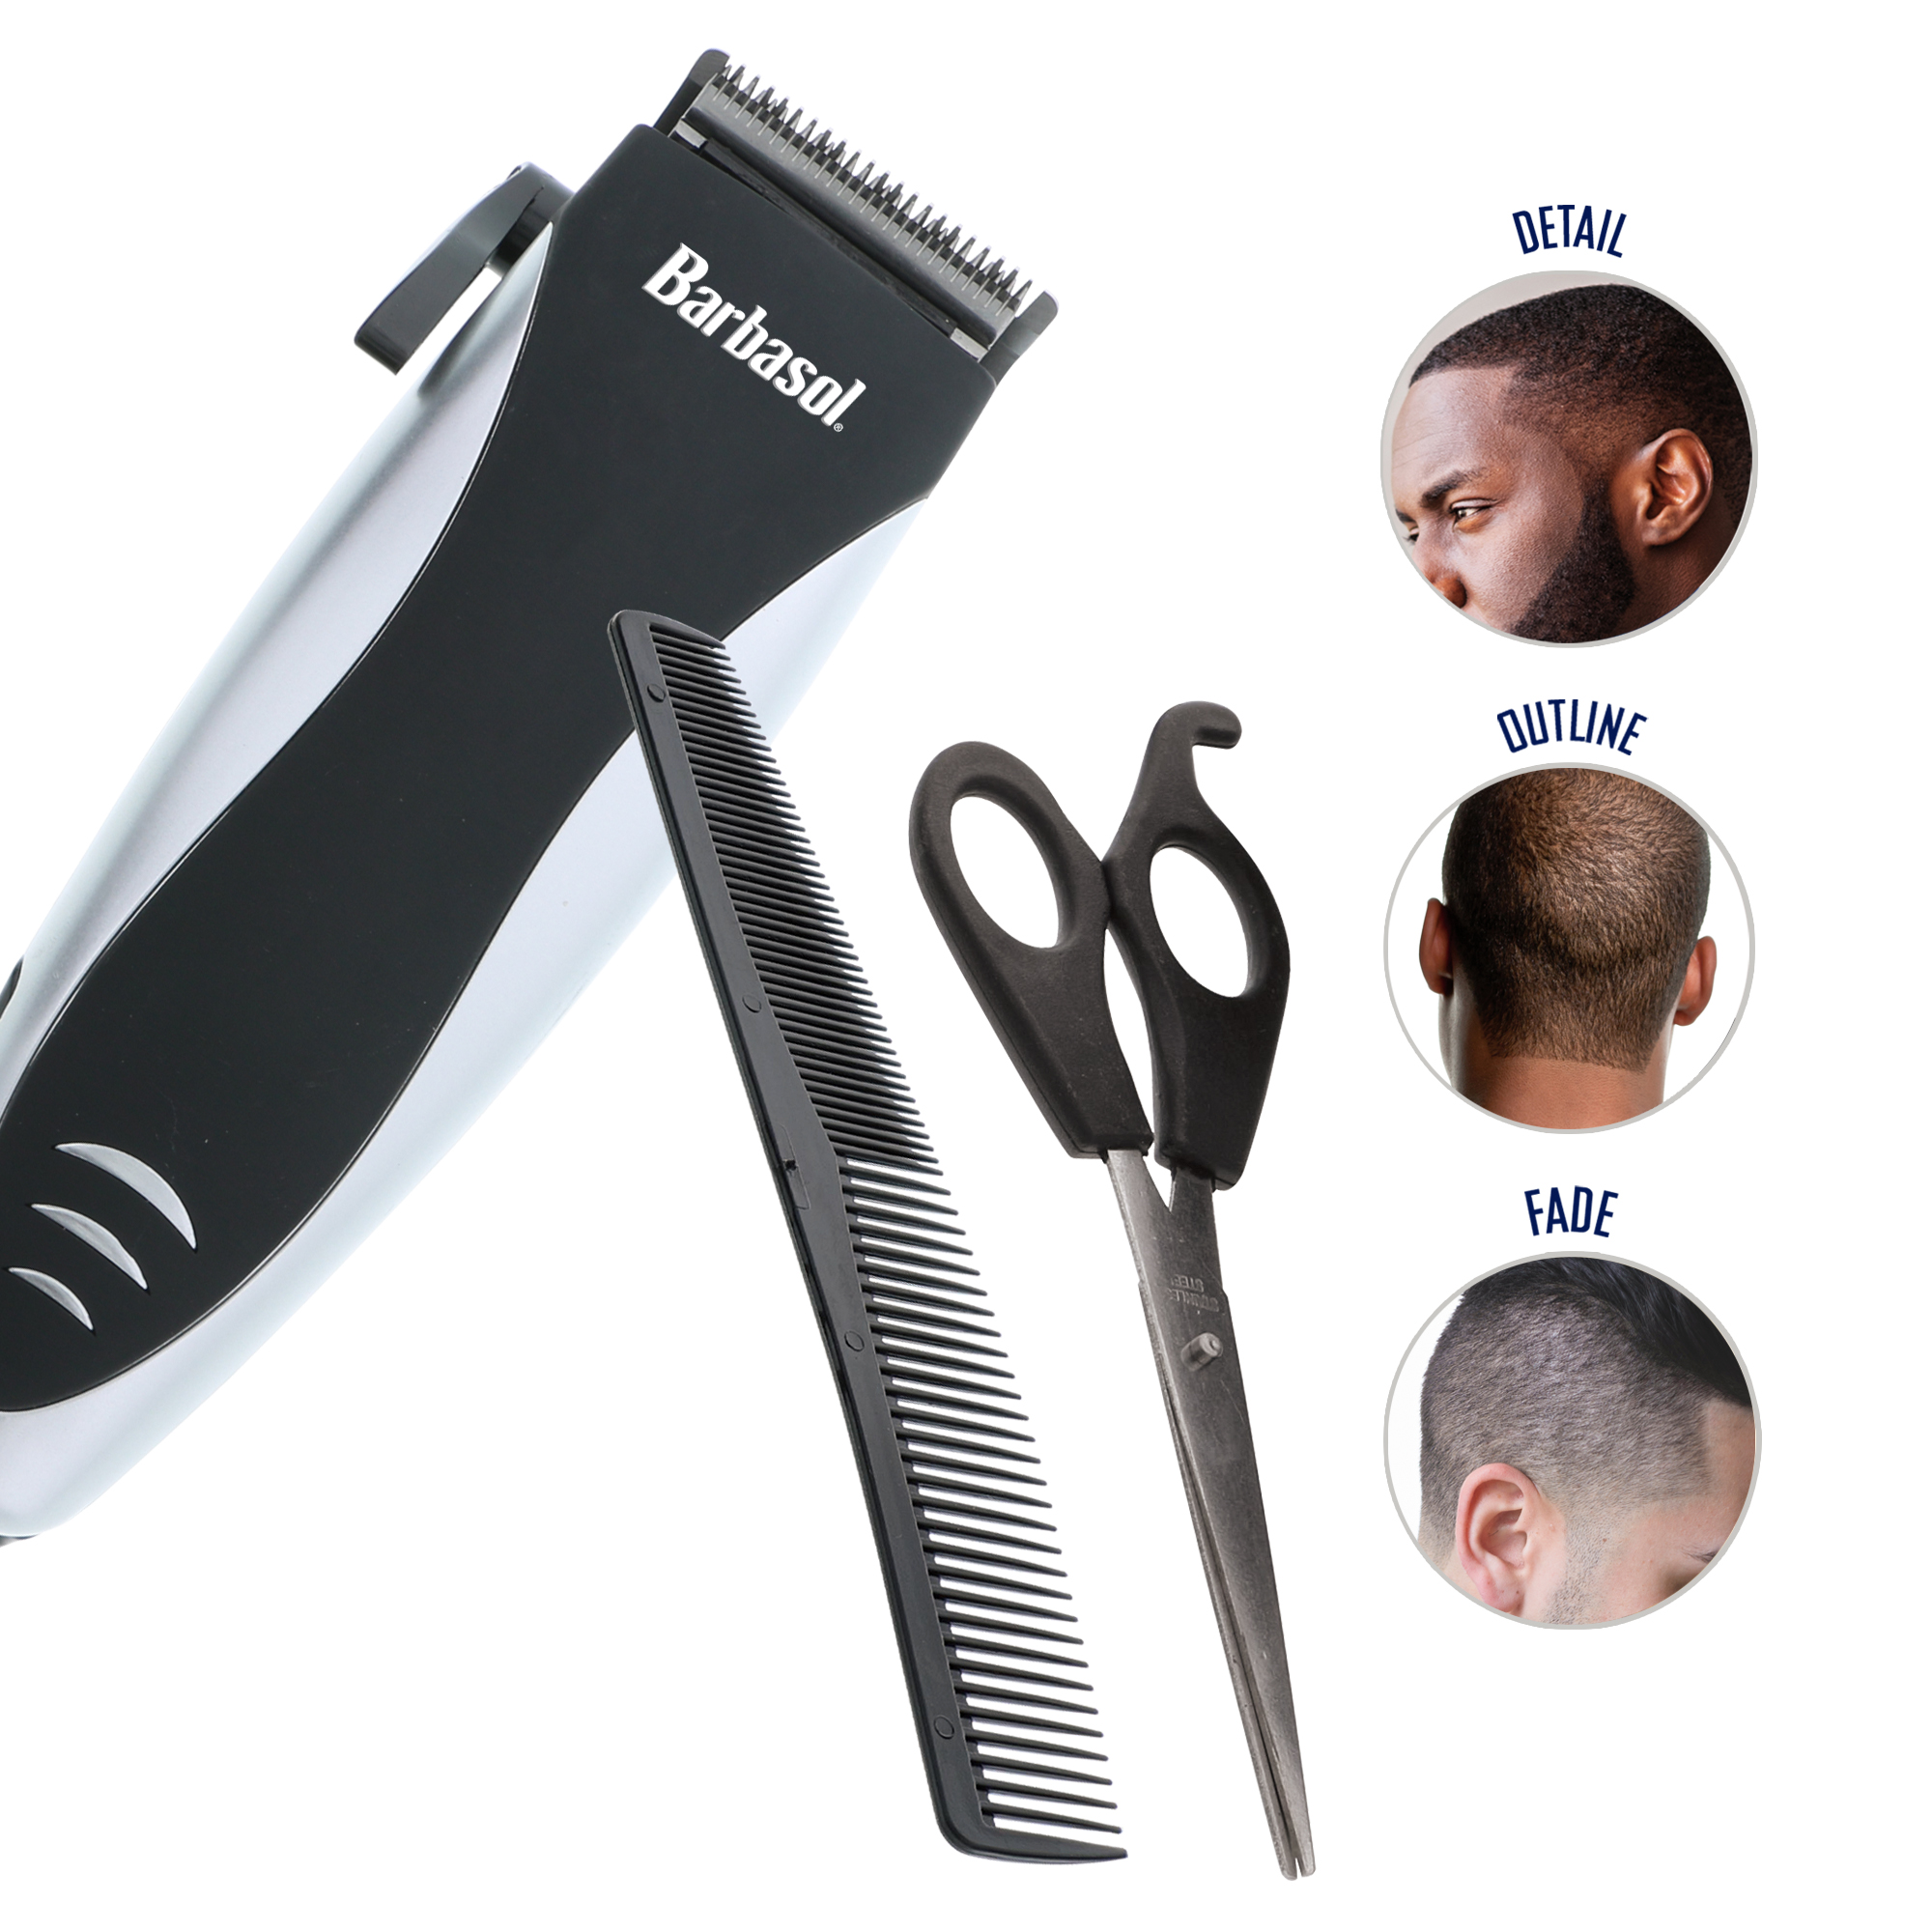 hair clippers kit